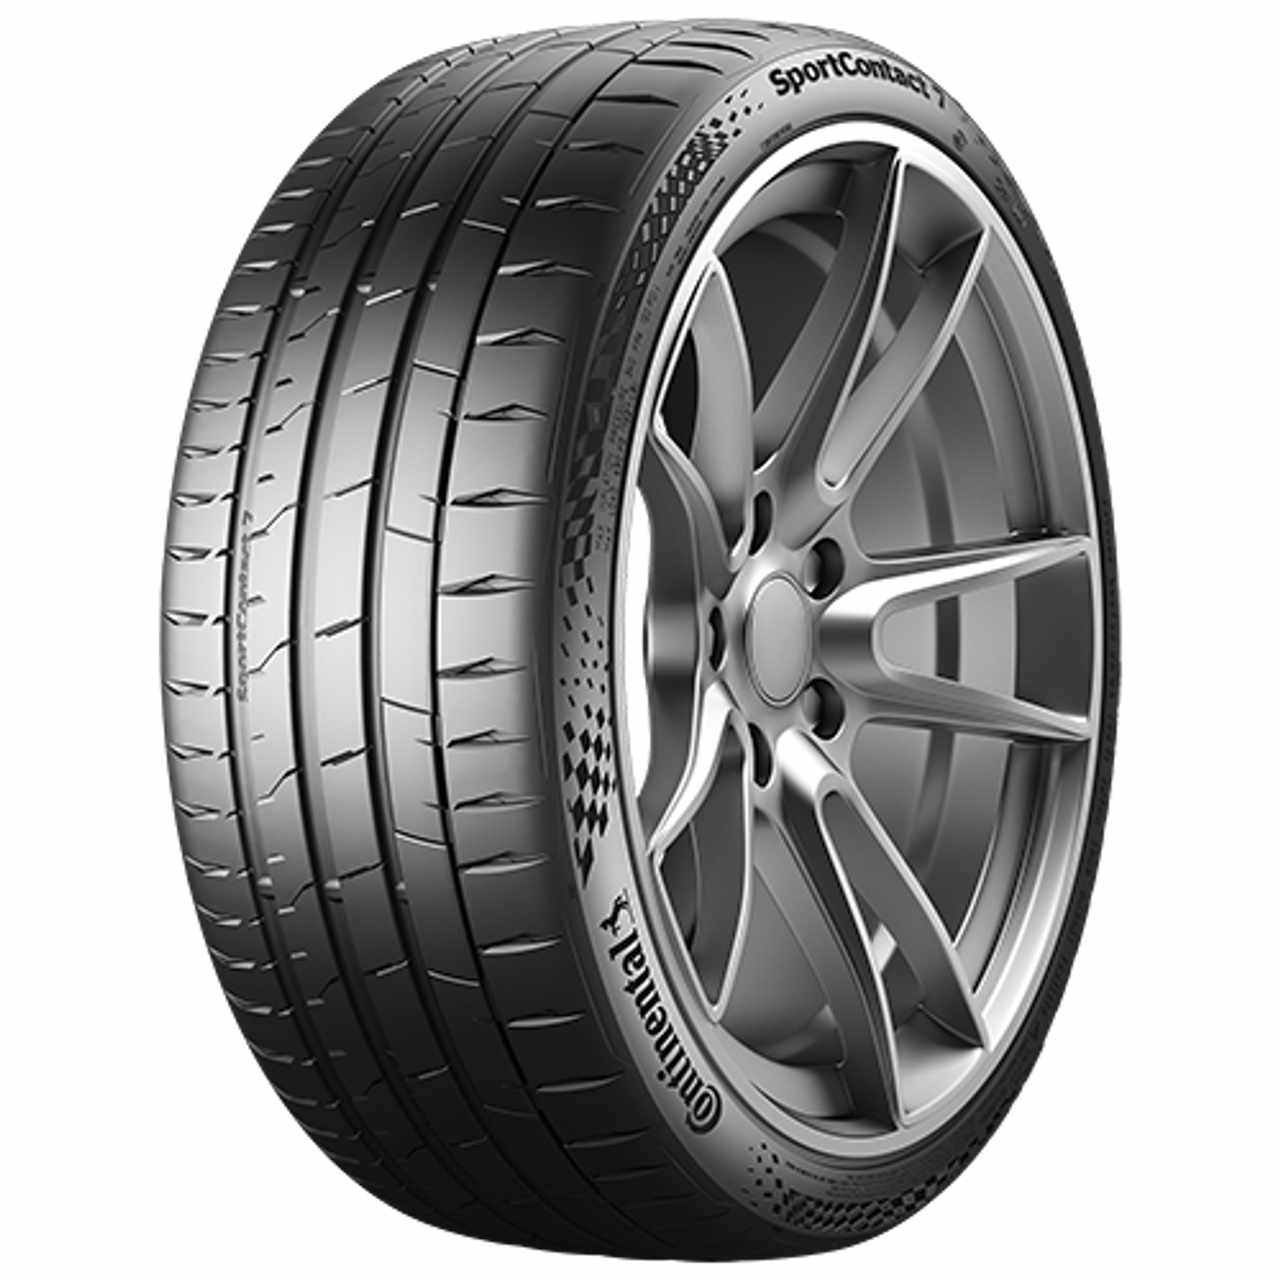 CONTINENTAL SPORTCONTACT 7 (MO1) (EVc) 265/35ZR19 98Y FR BSW